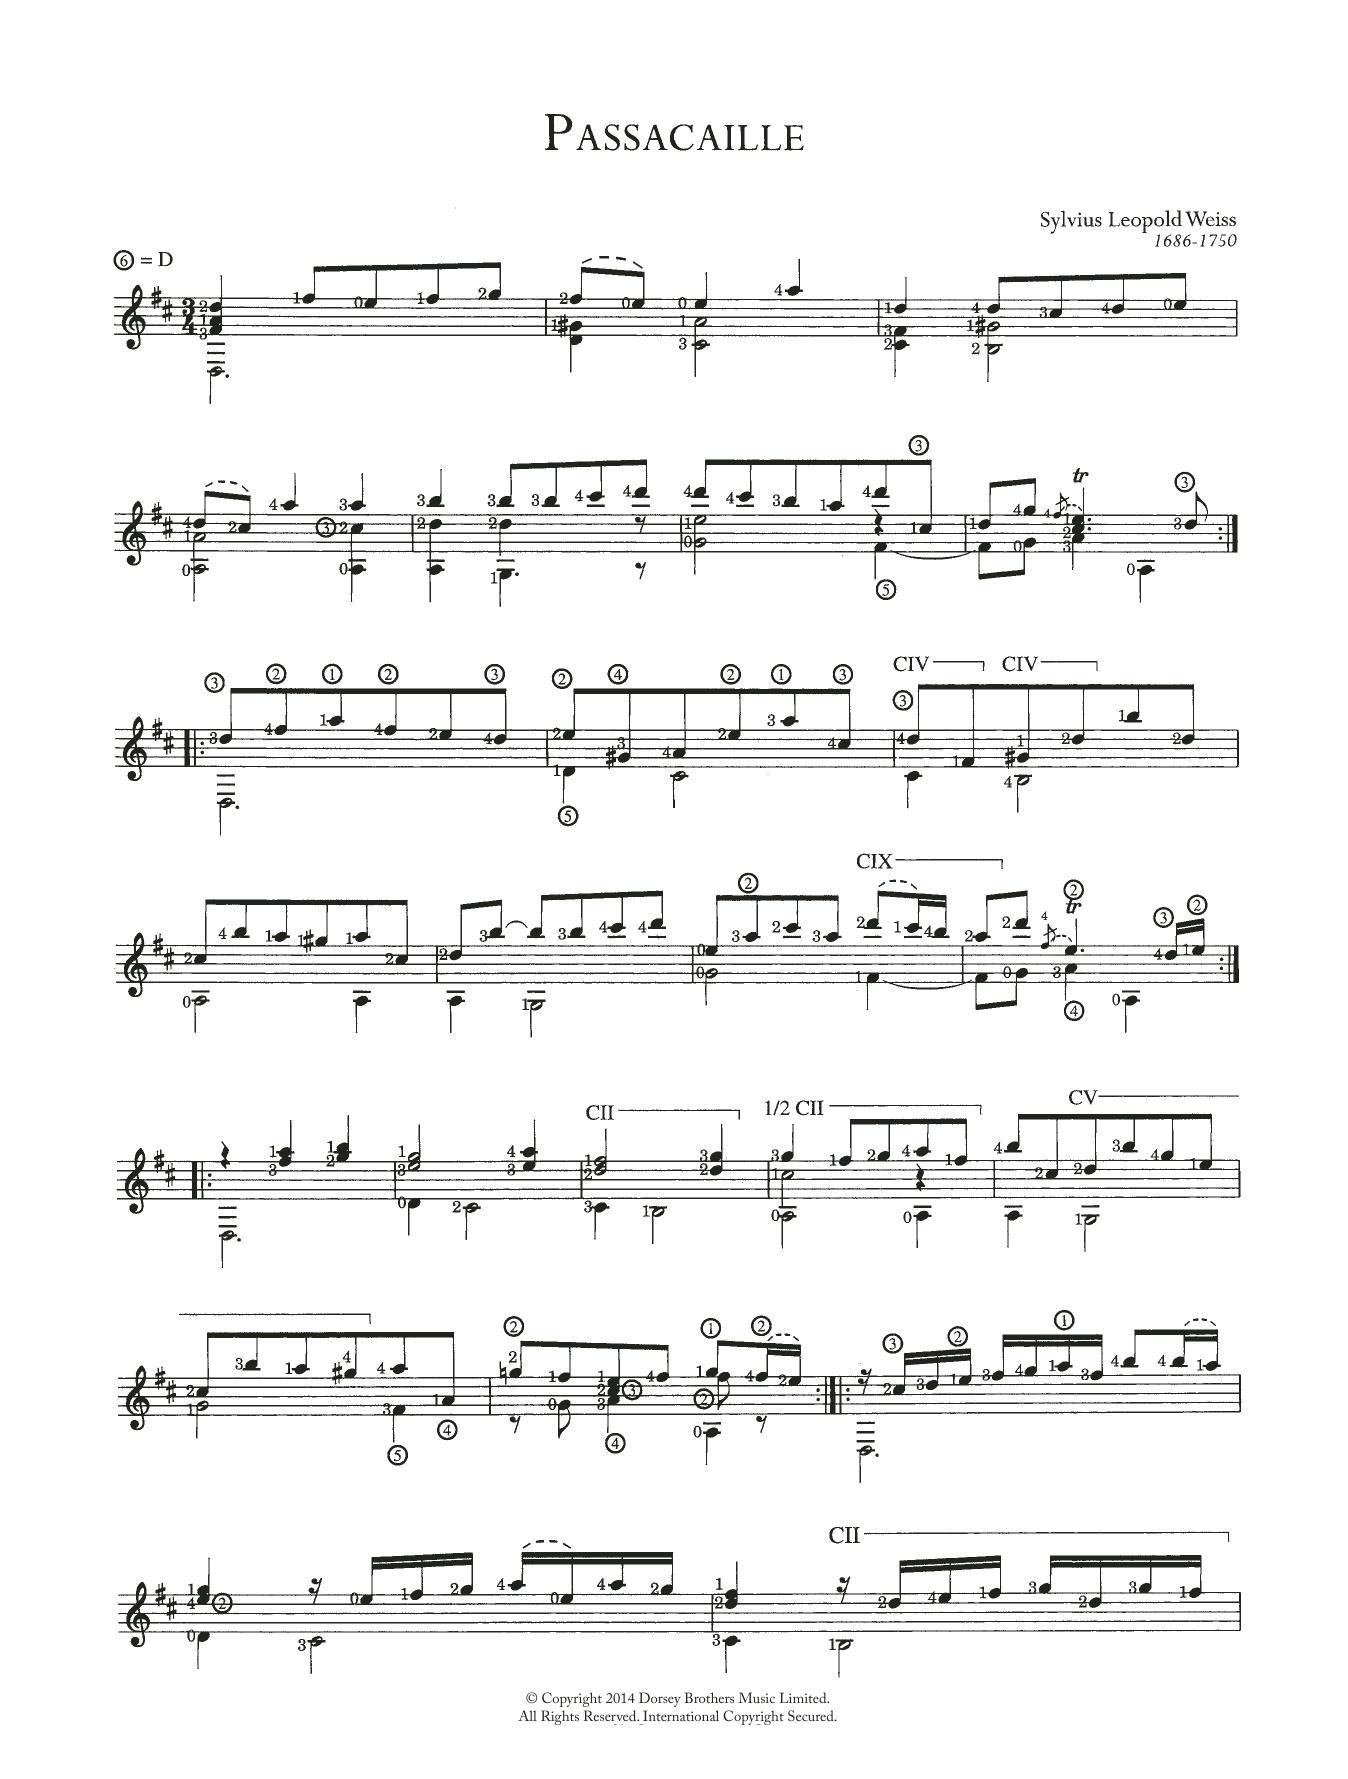 Sylvius Leopold Weiss Passacaille sheet music preview music notes and score for Guitar including 4 page(s)